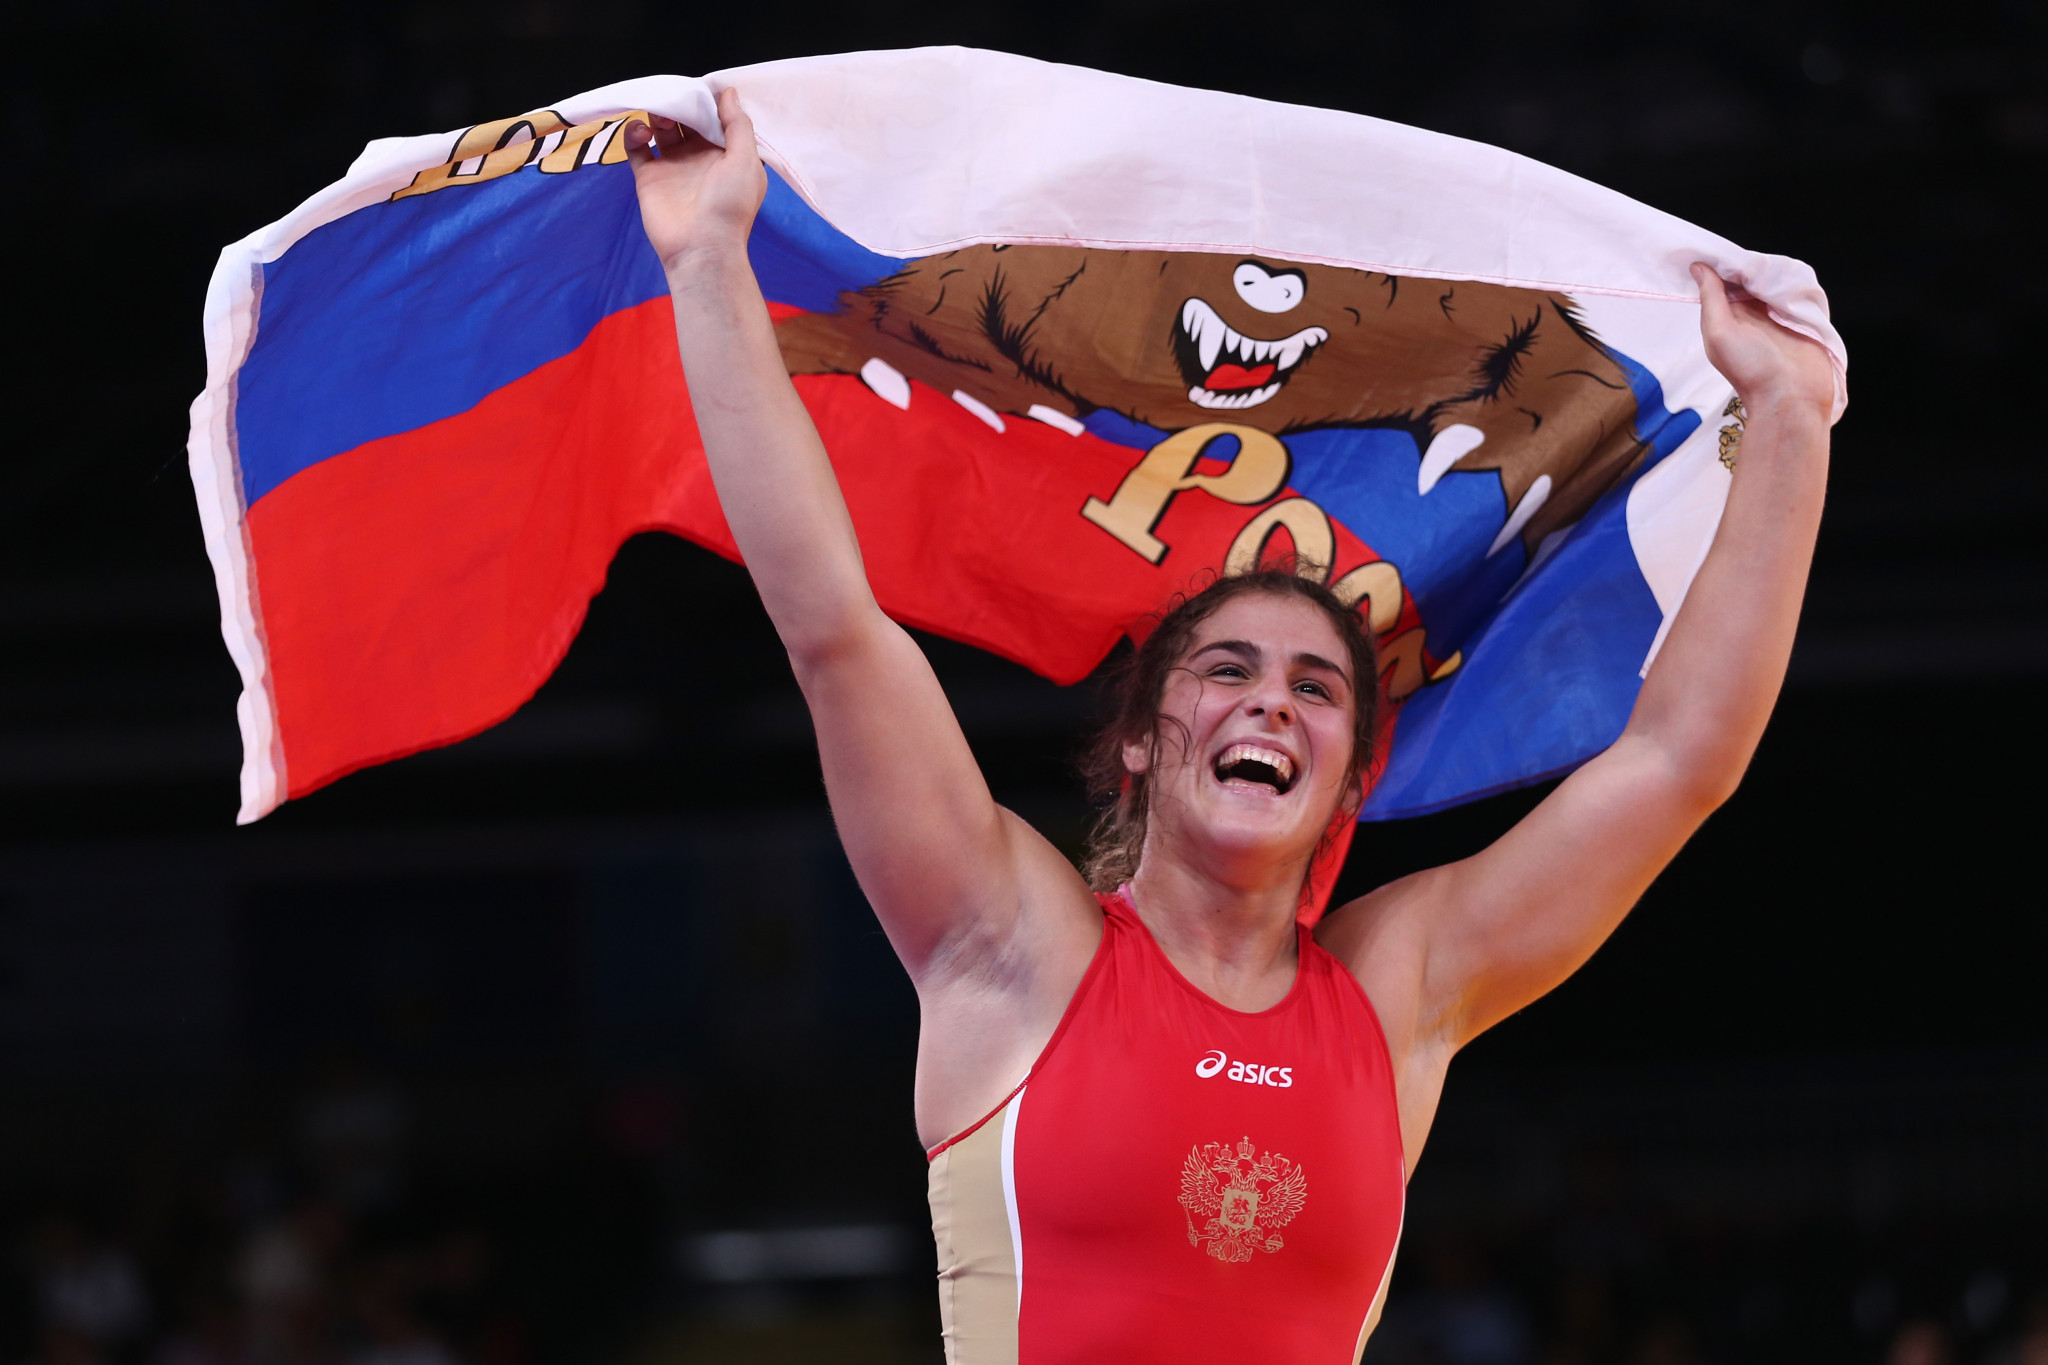 Twelve more wrestlers secure Tokyo 2020 places as women’s action takes centre stage at European Olympic qualifier